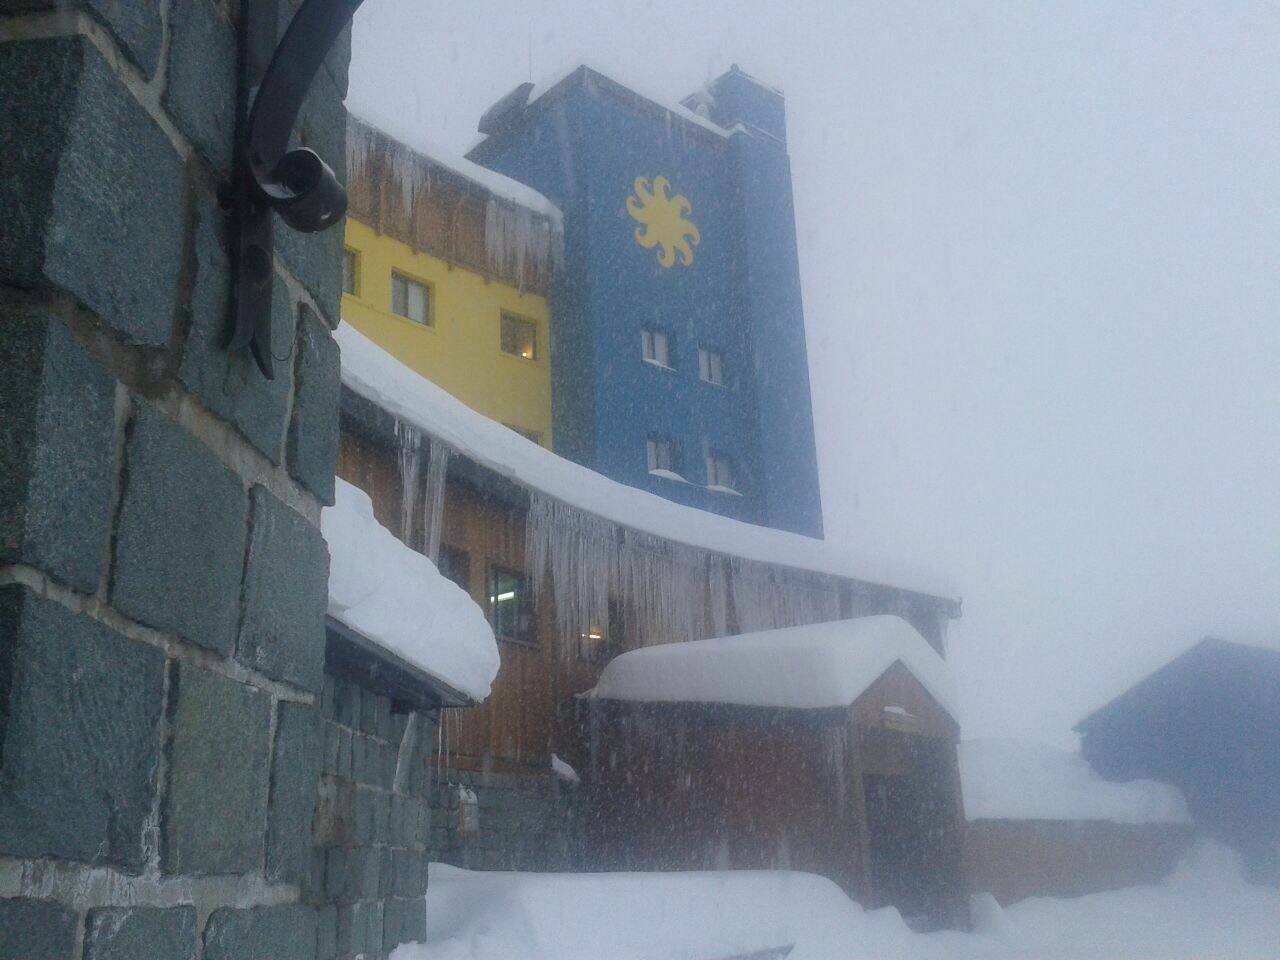 Portillo, Chile on June 3rd, 2016 during the storm cycle that dropped 10 feet. photo: portillo